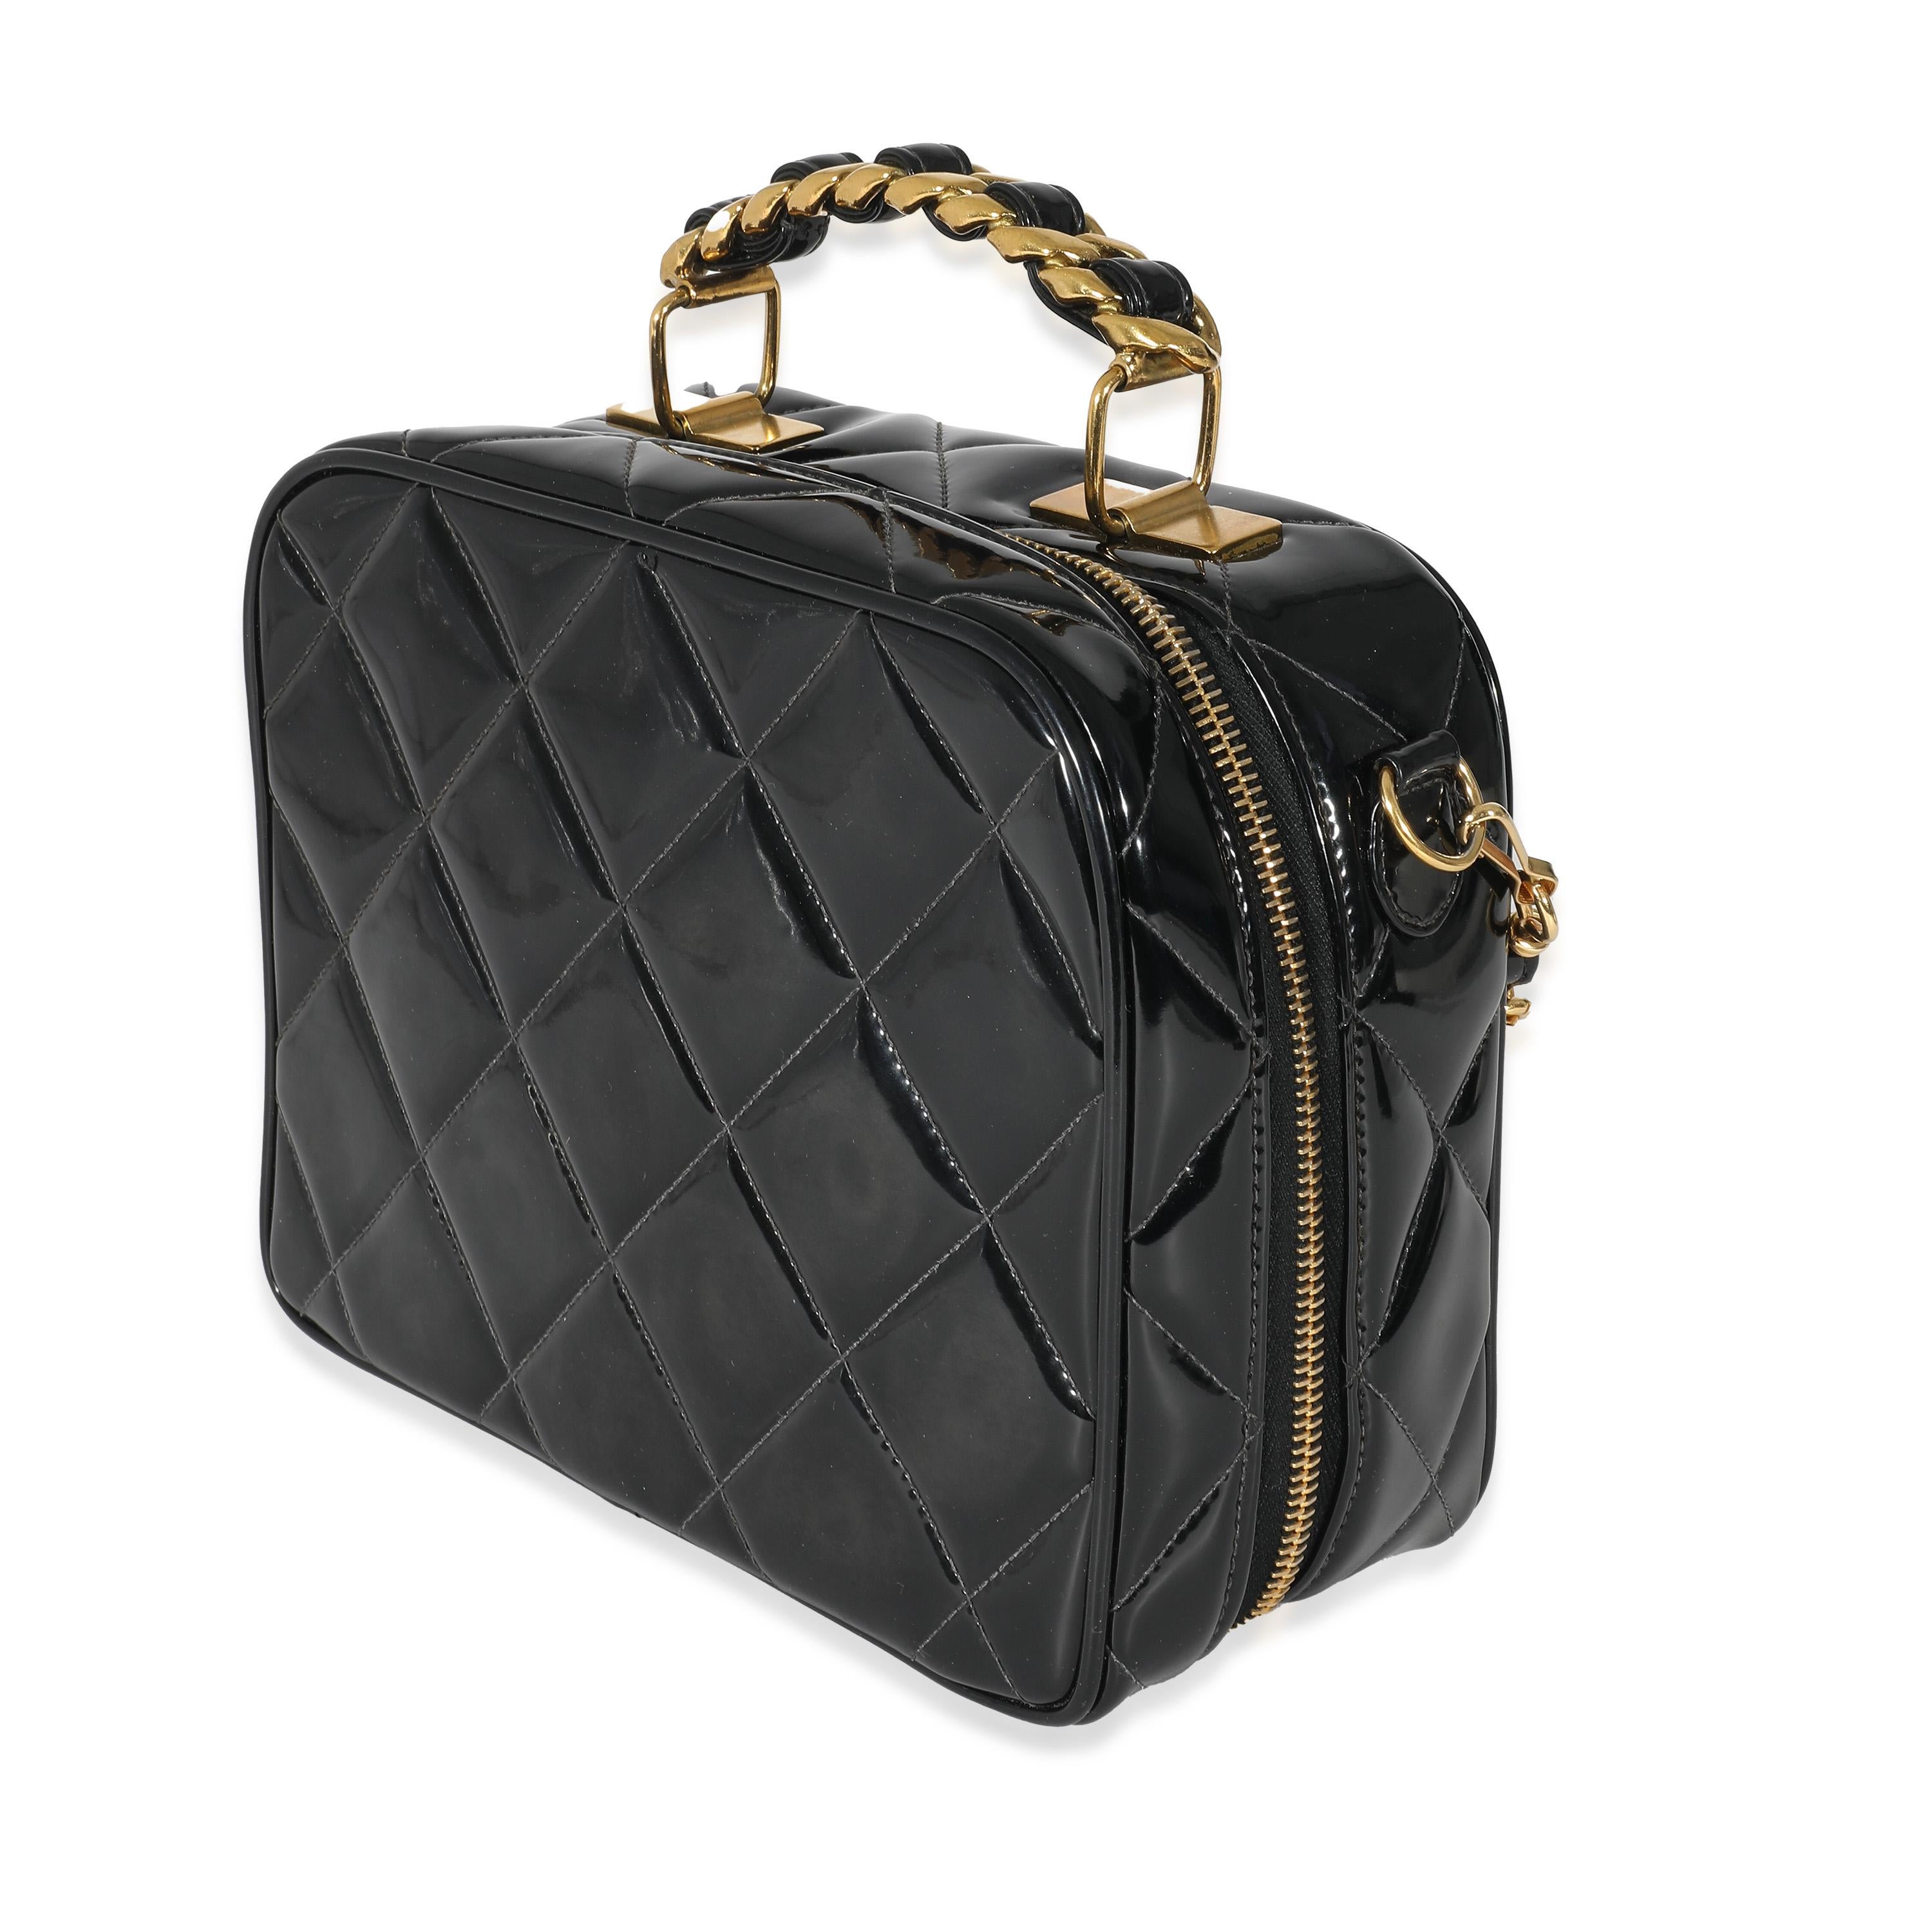 Chanel Vintage Black Quilted Patent Lunch Box Bag In Excellent Condition For Sale In New York, NY